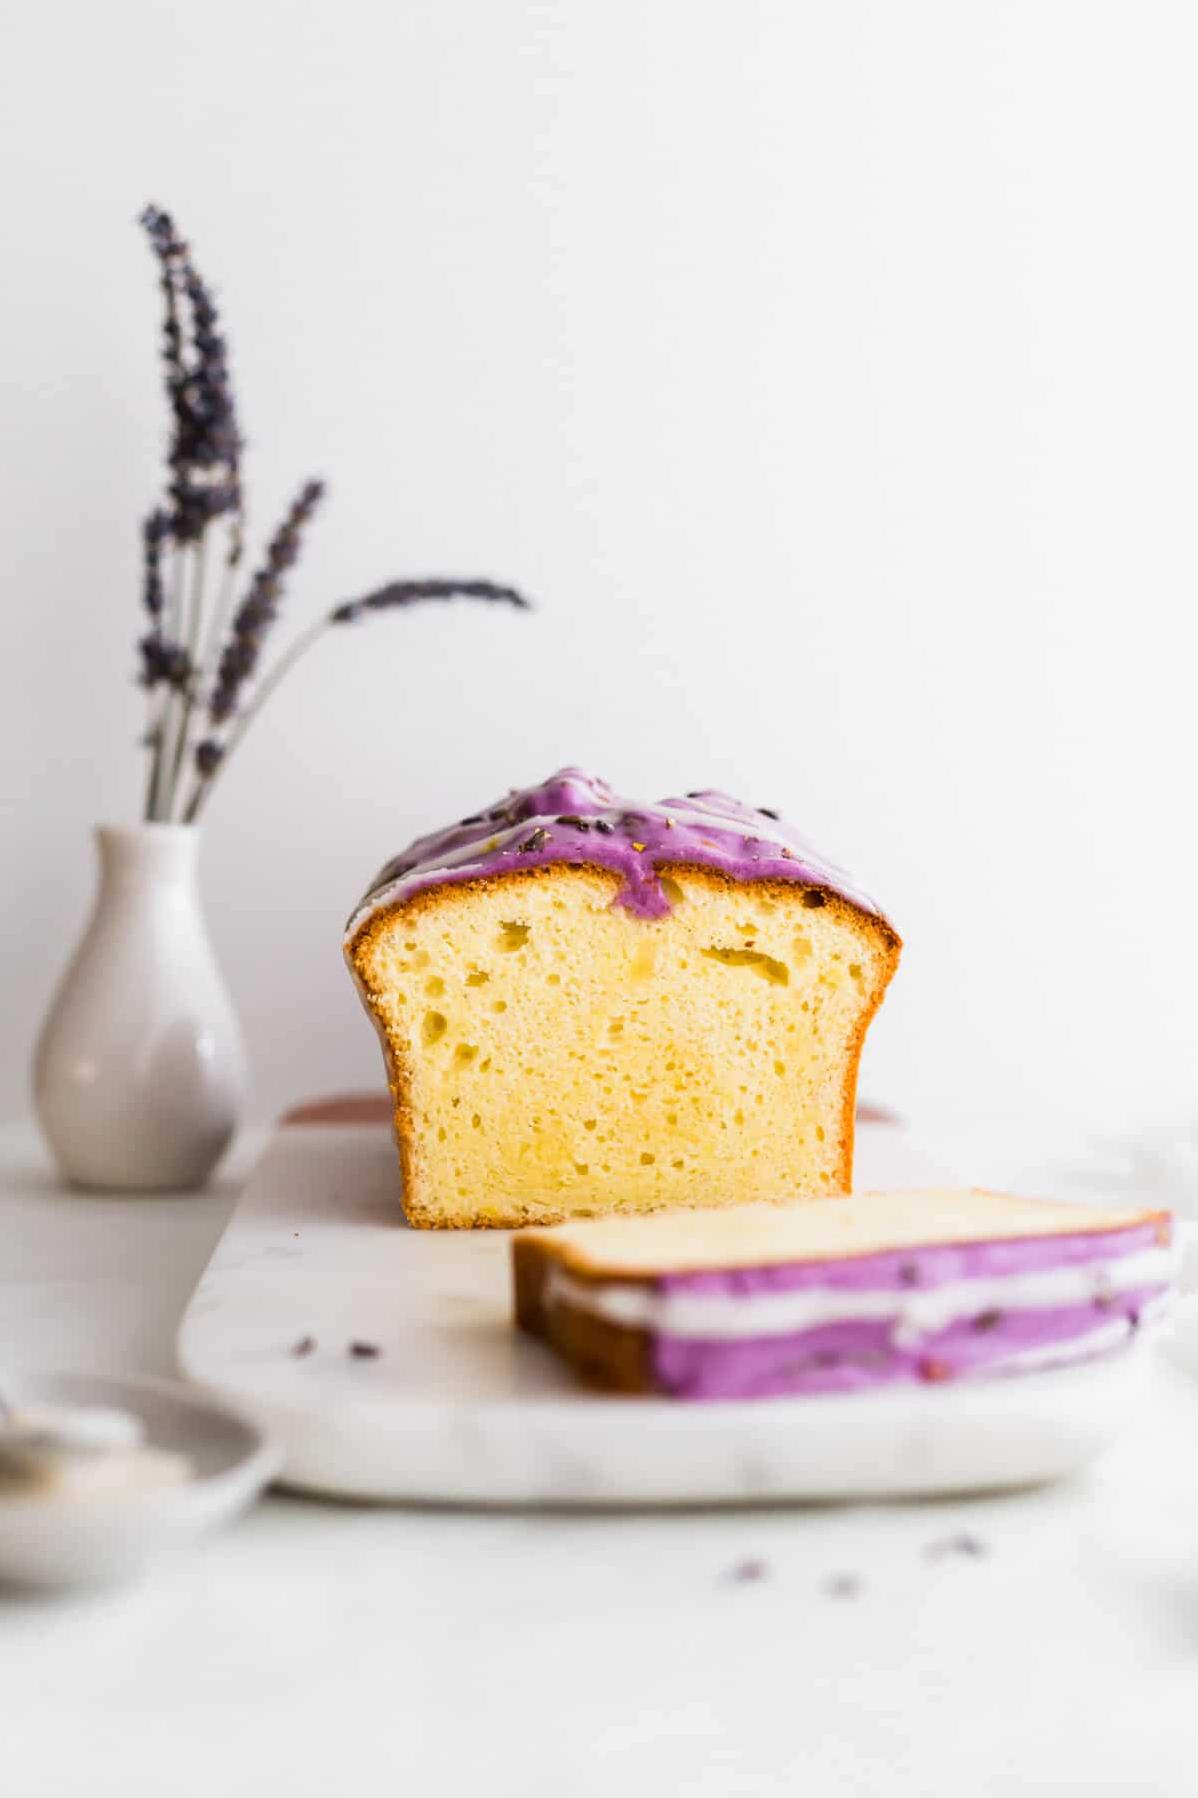  This Lavender Pound Cake is a true showstopper.